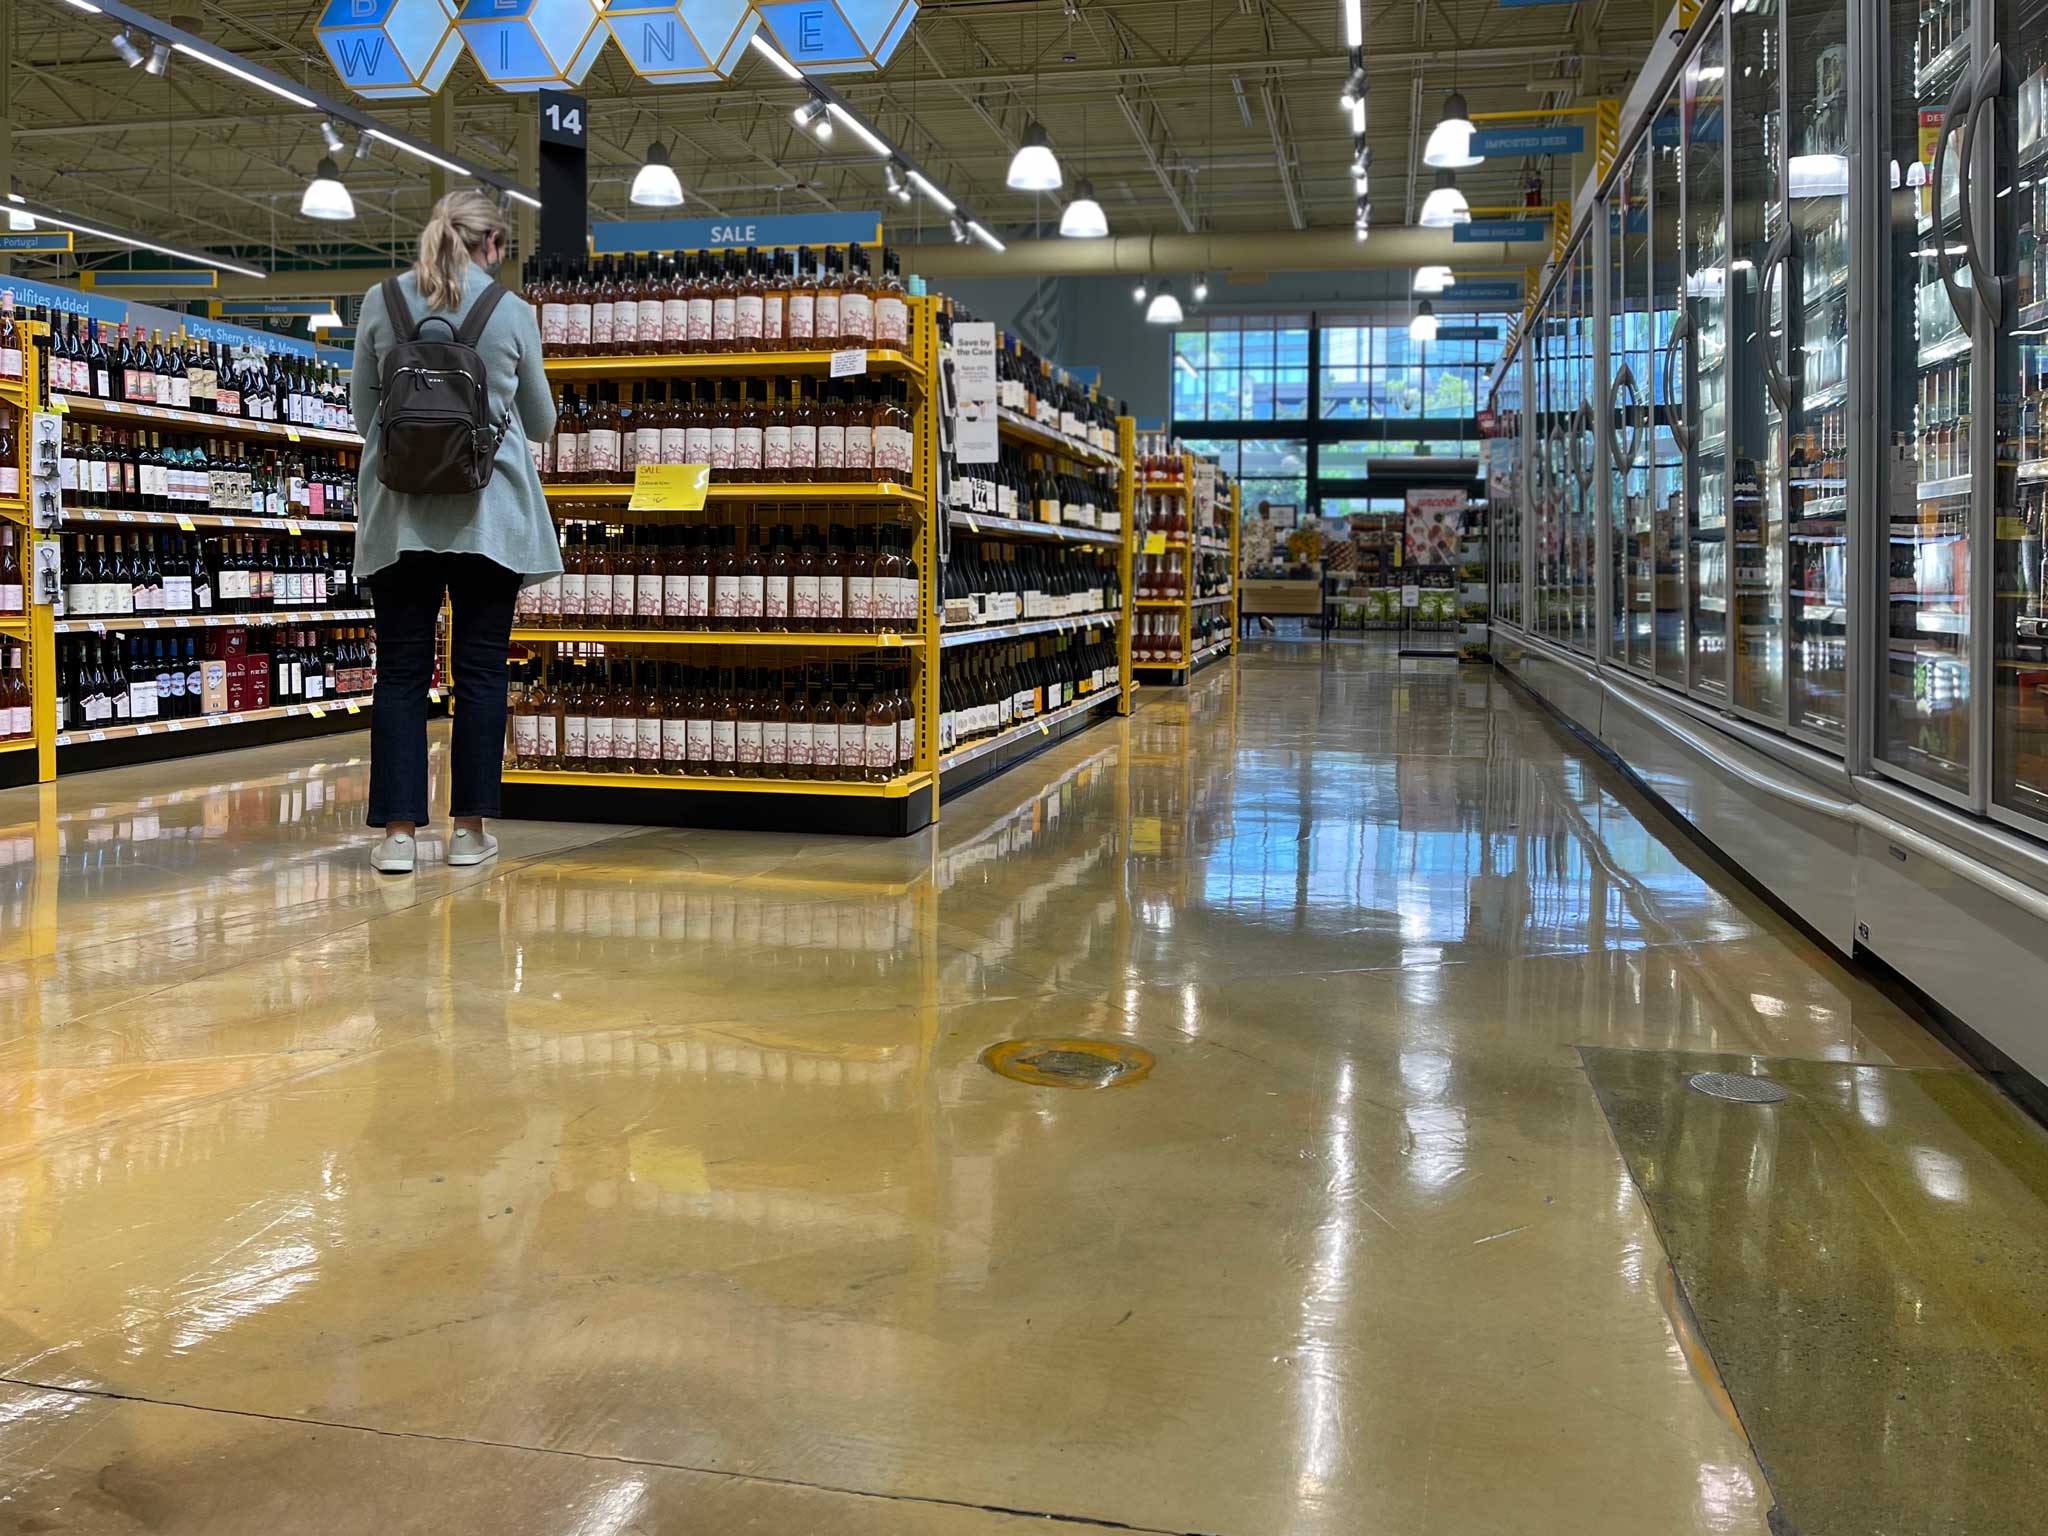 skraffino Concrete Microtopping Whole Foods Bellvue WA 12 Whole Foods Market Bellvue WA Gallery | Duraamen | Duraamen Engineered Products Inc